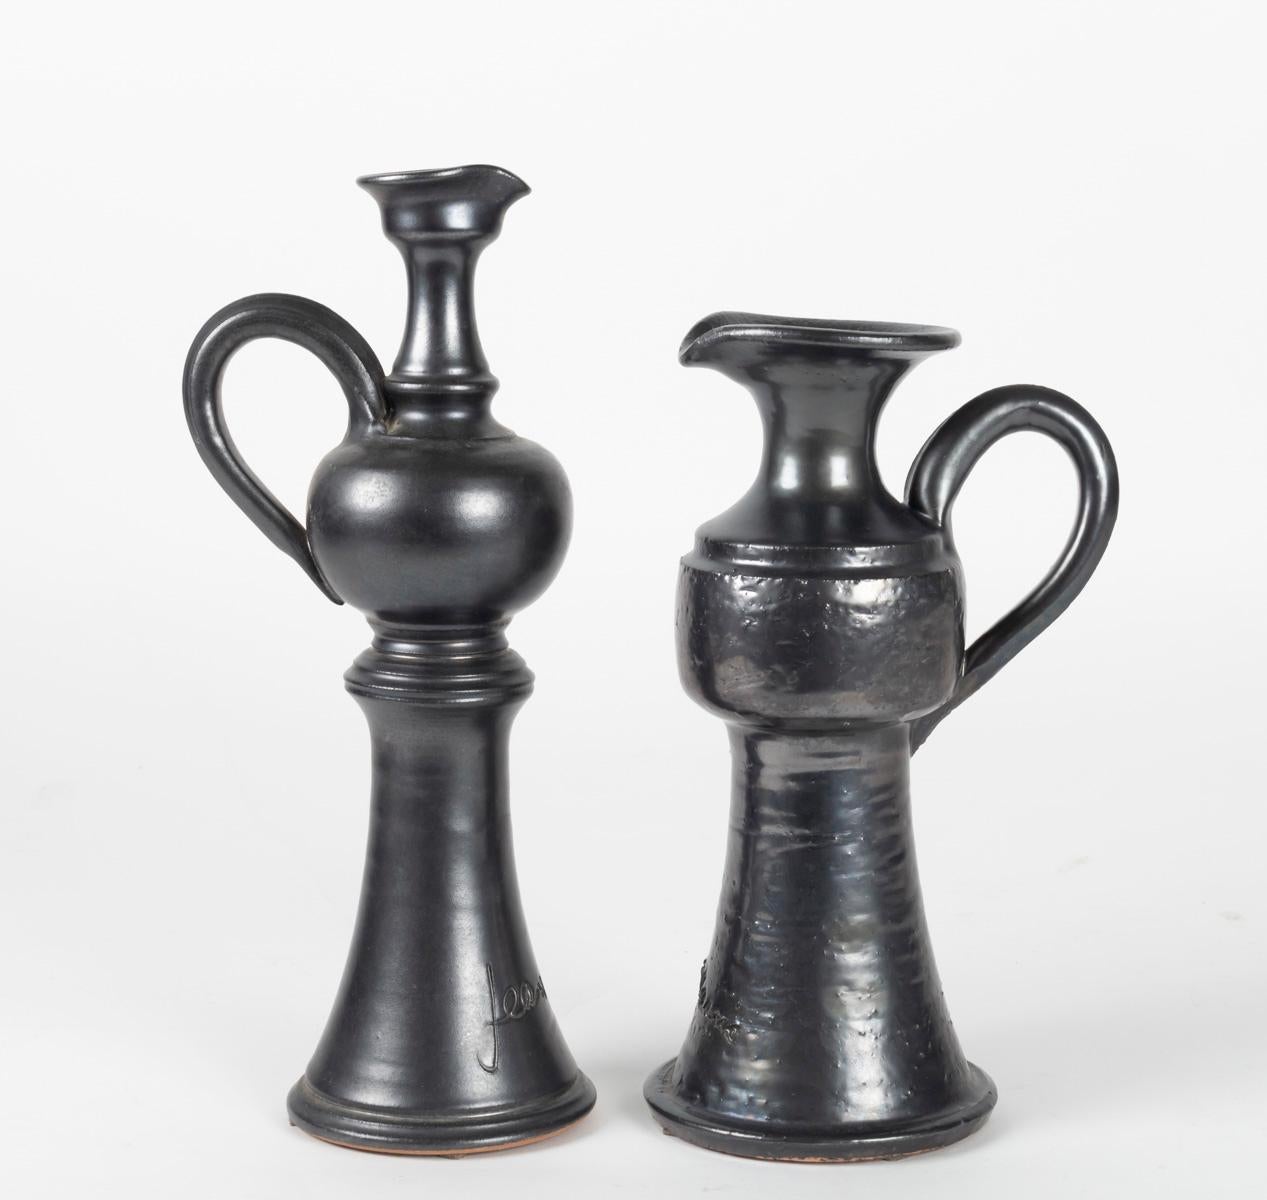 The set is composed by two jugs with different heights.
They feature a black enameled finish and the Jean Marais signature.
  